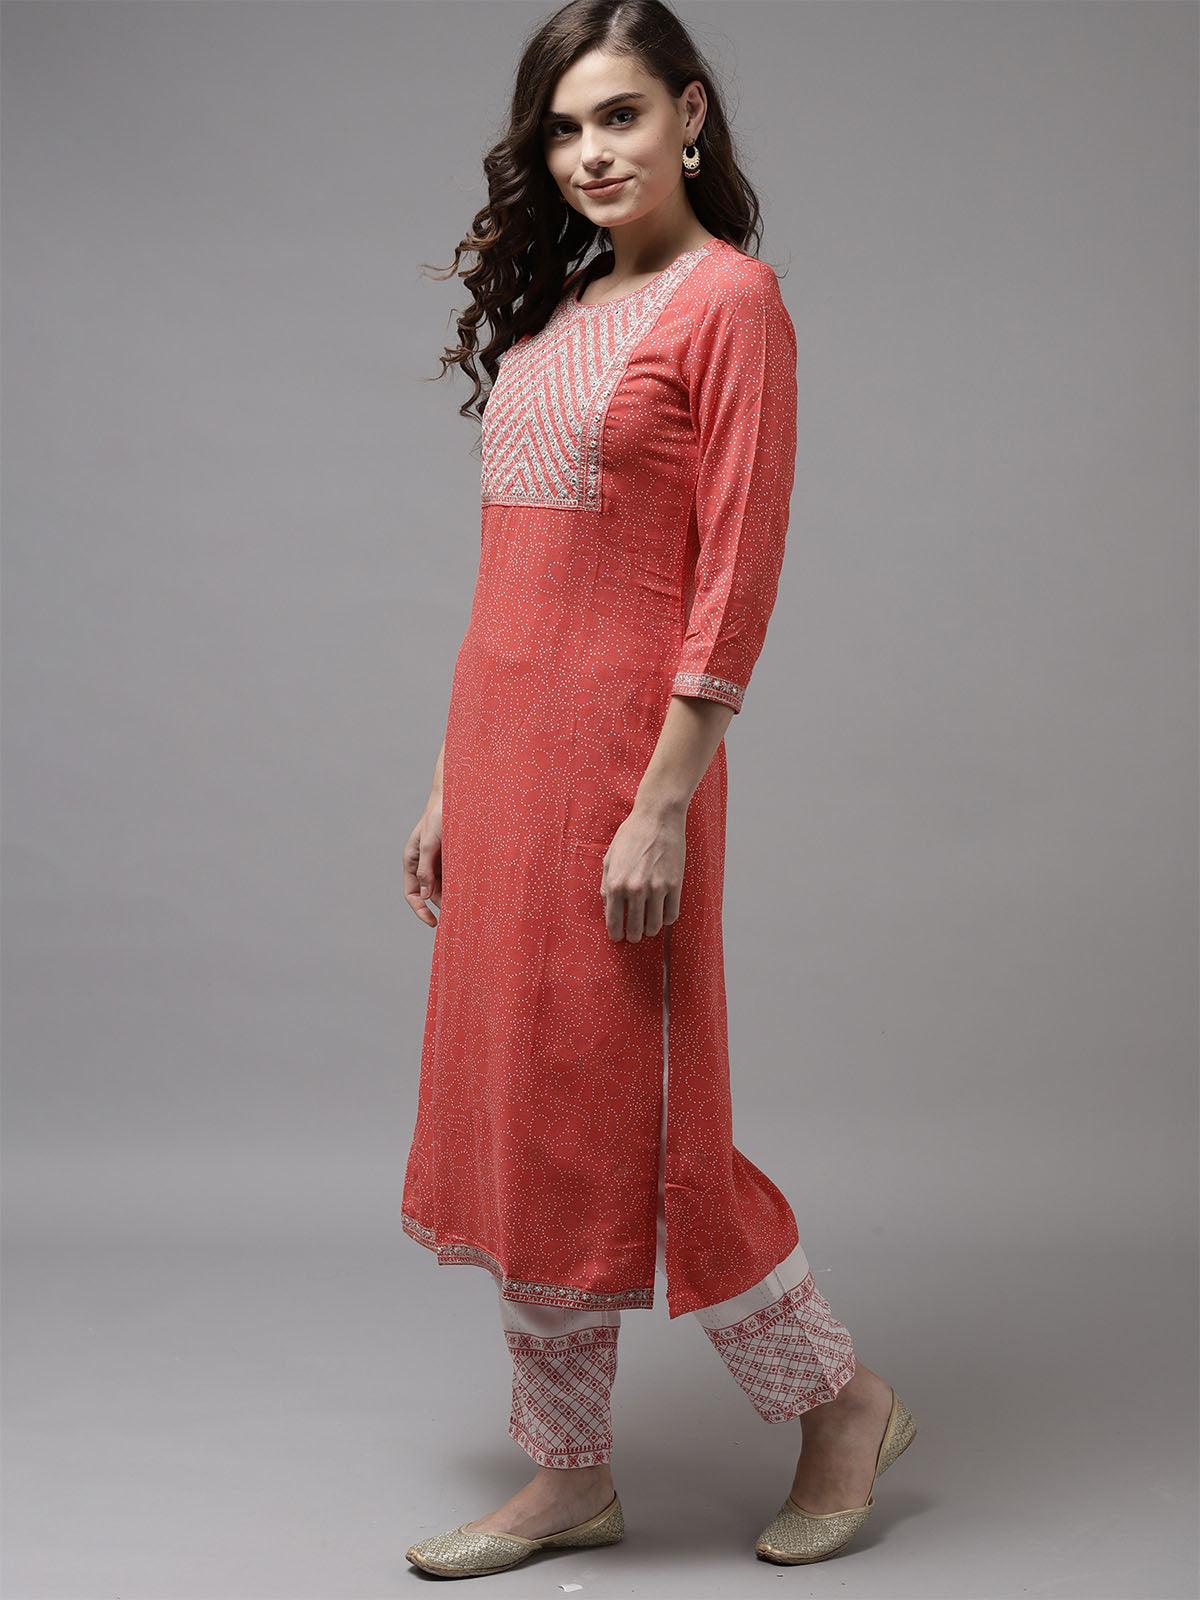 Women's Coral Embroidered Straight Kurta Trouser With Dupatta Set - Odette